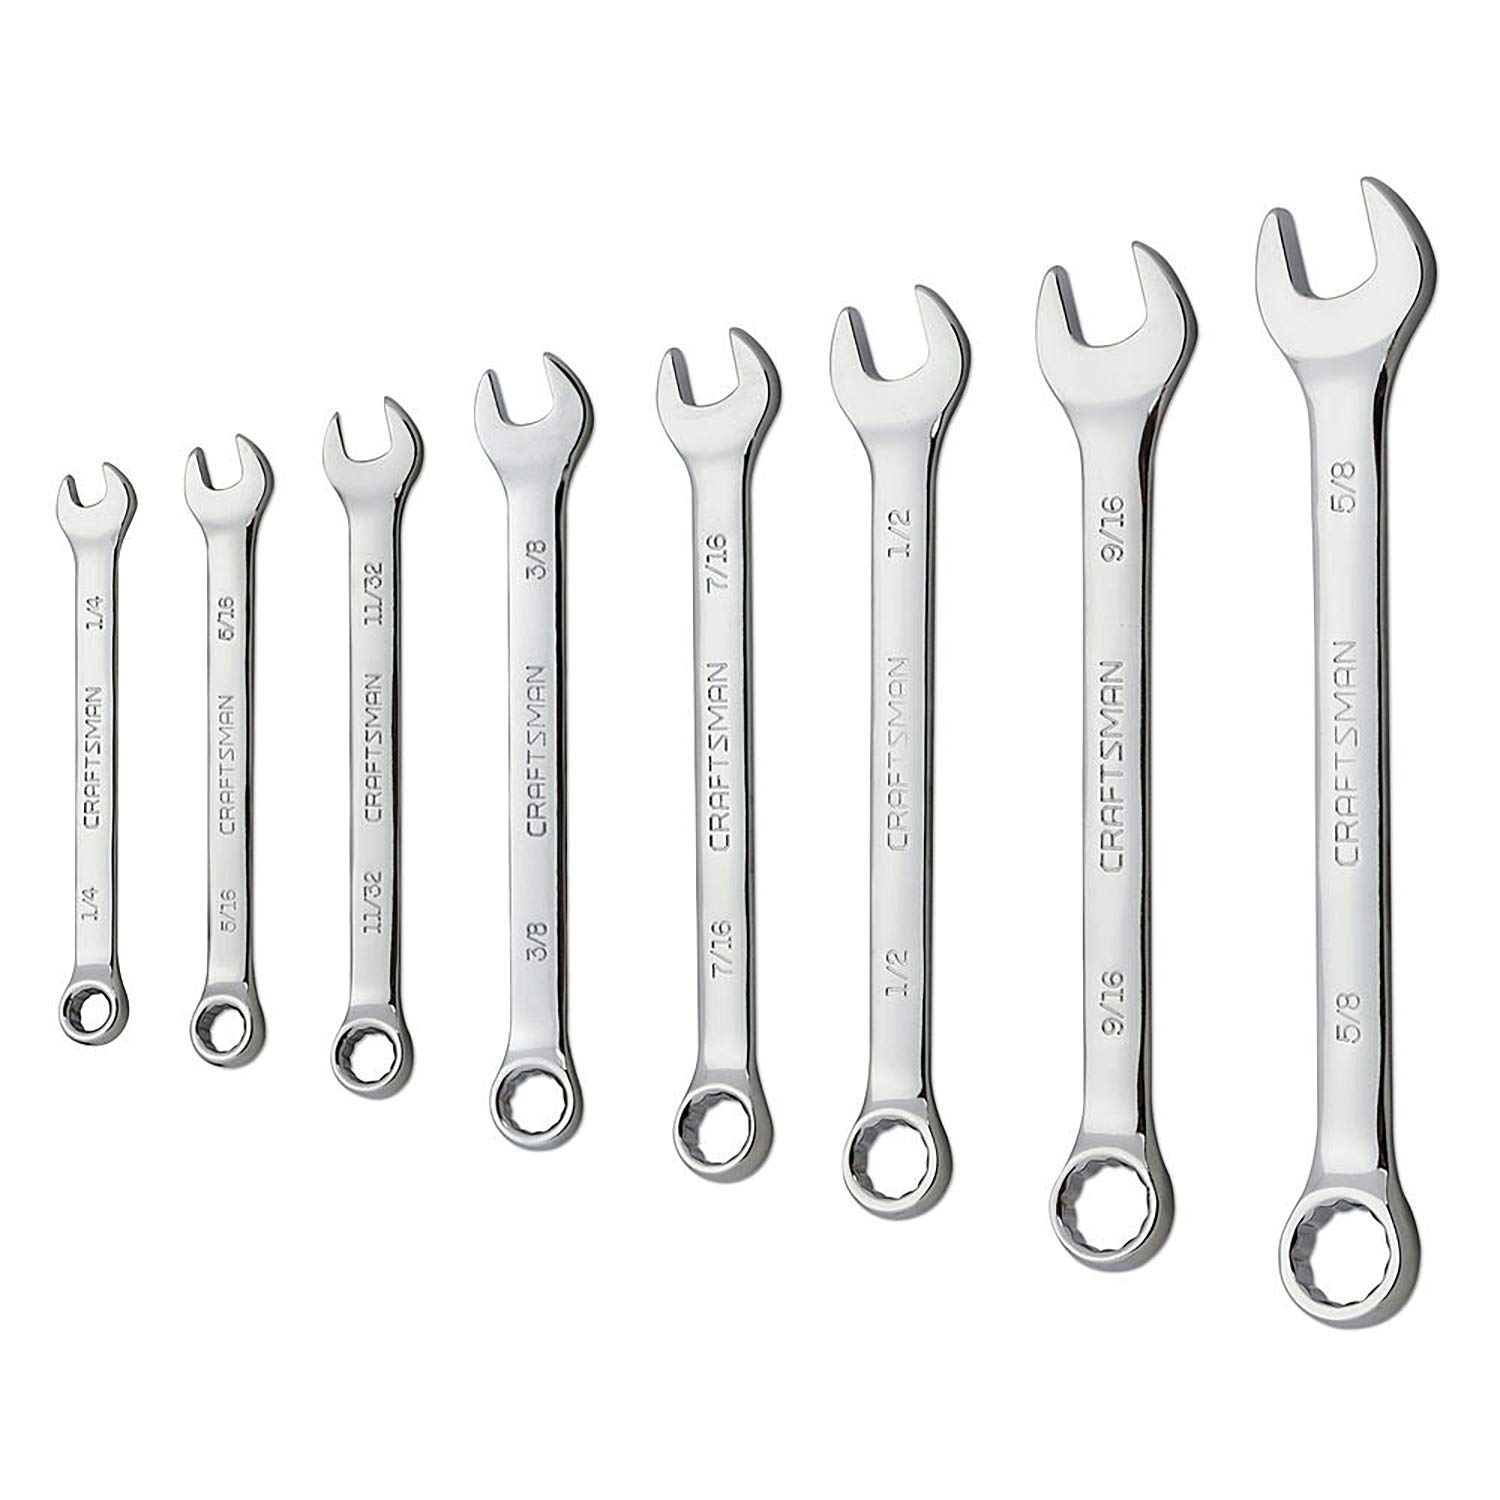 Wholesale wrenches multiple sizes